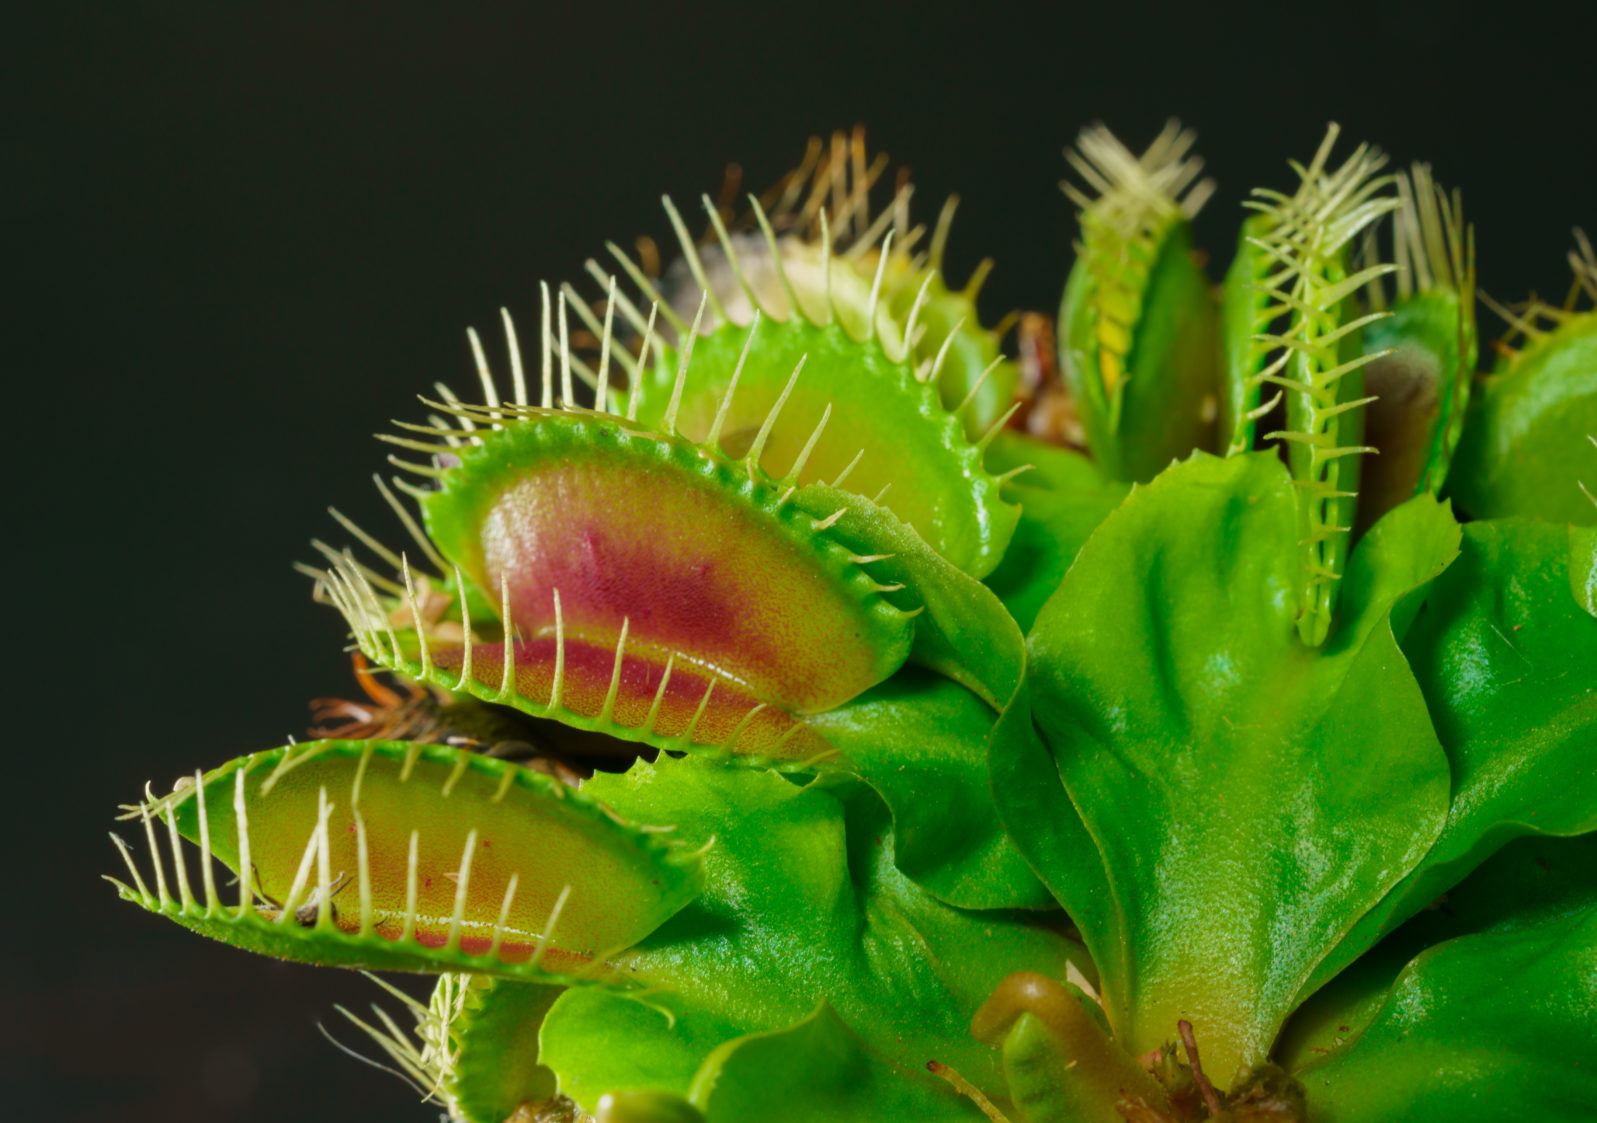 Venus flytrap is one of the carnivore plants